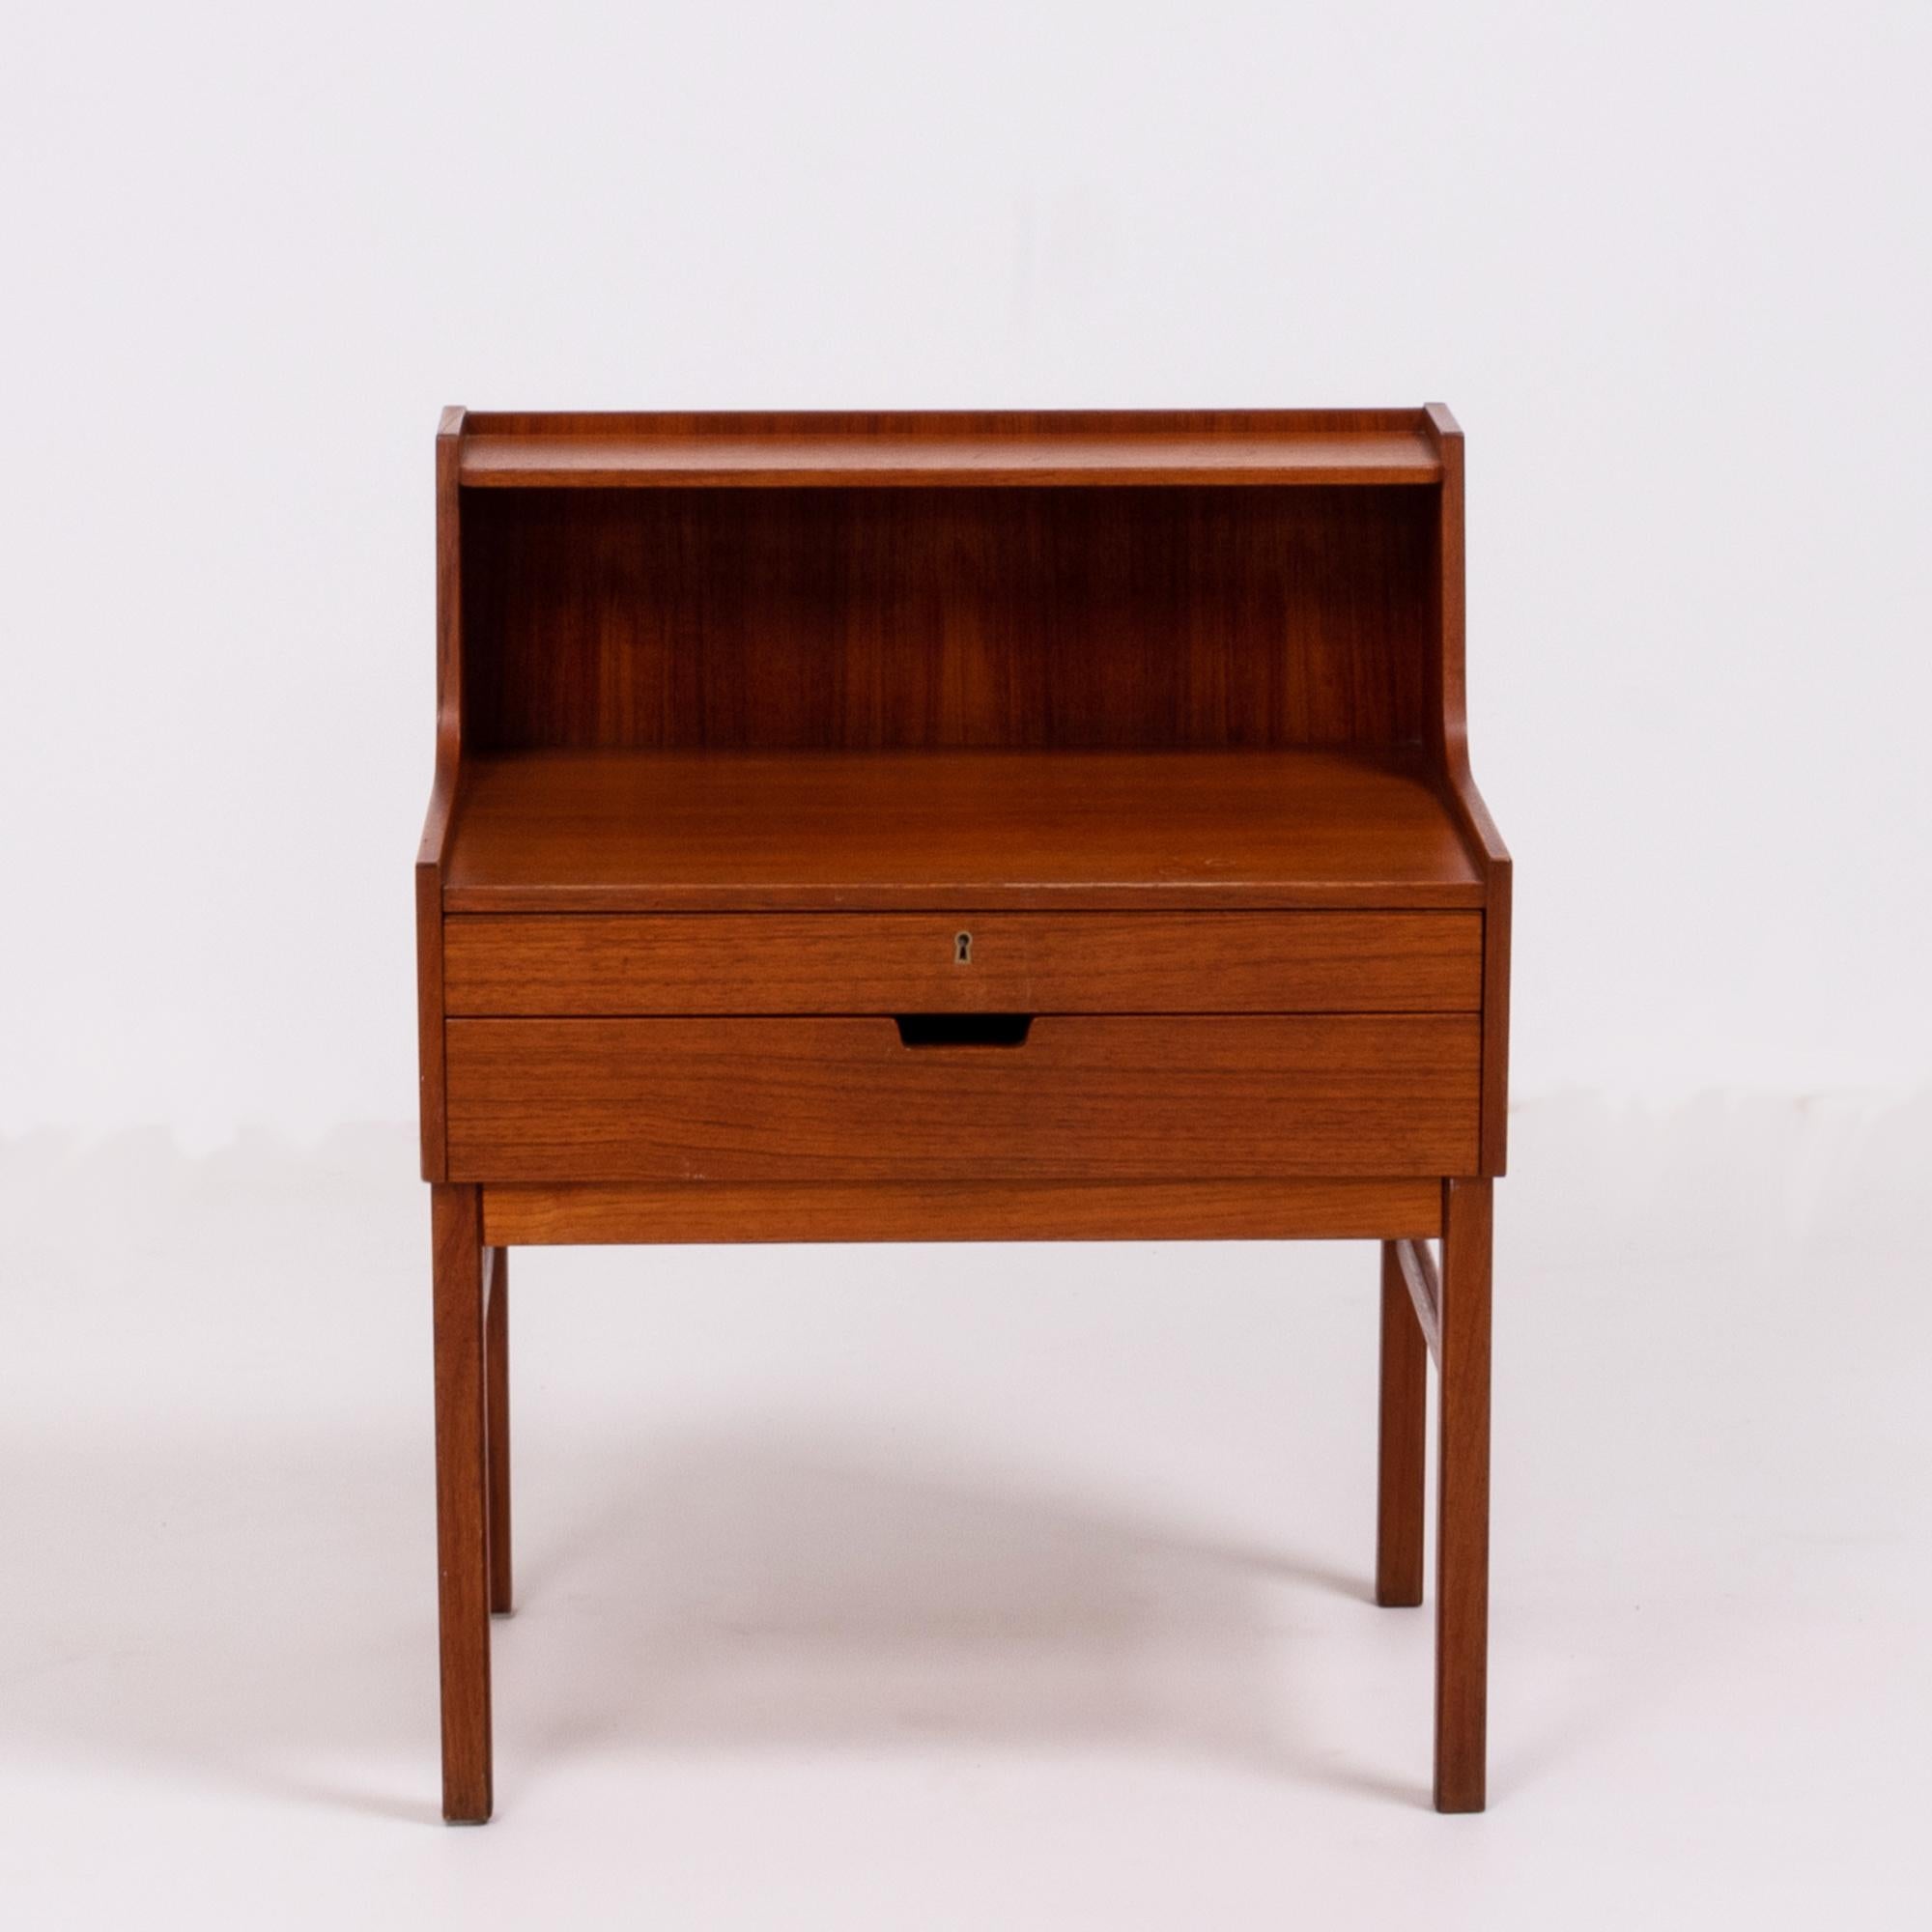 Designed by Sven Engström and Gunnar Myrstrand, this bedside table is beautifully constructed in teak.
Featuring a narrow shelf at the top, the bedside table has two drawers, both with internal dividers. The top drawer can be locked with a key.
   